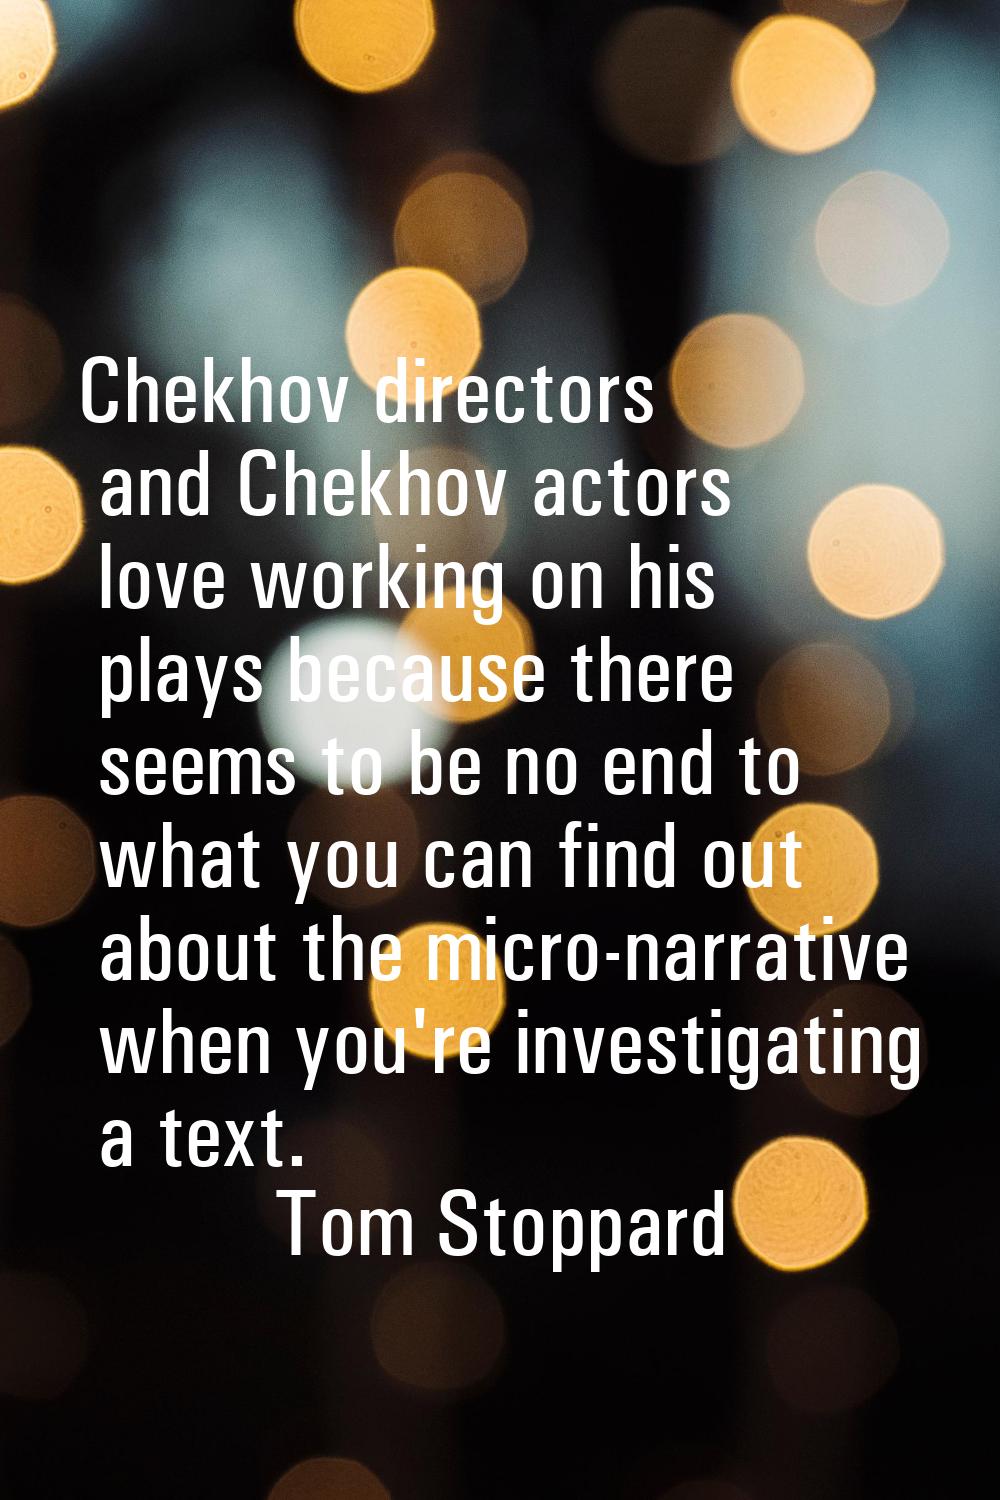 Chekhov directors and Chekhov actors love working on his plays because there seems to be no end to 